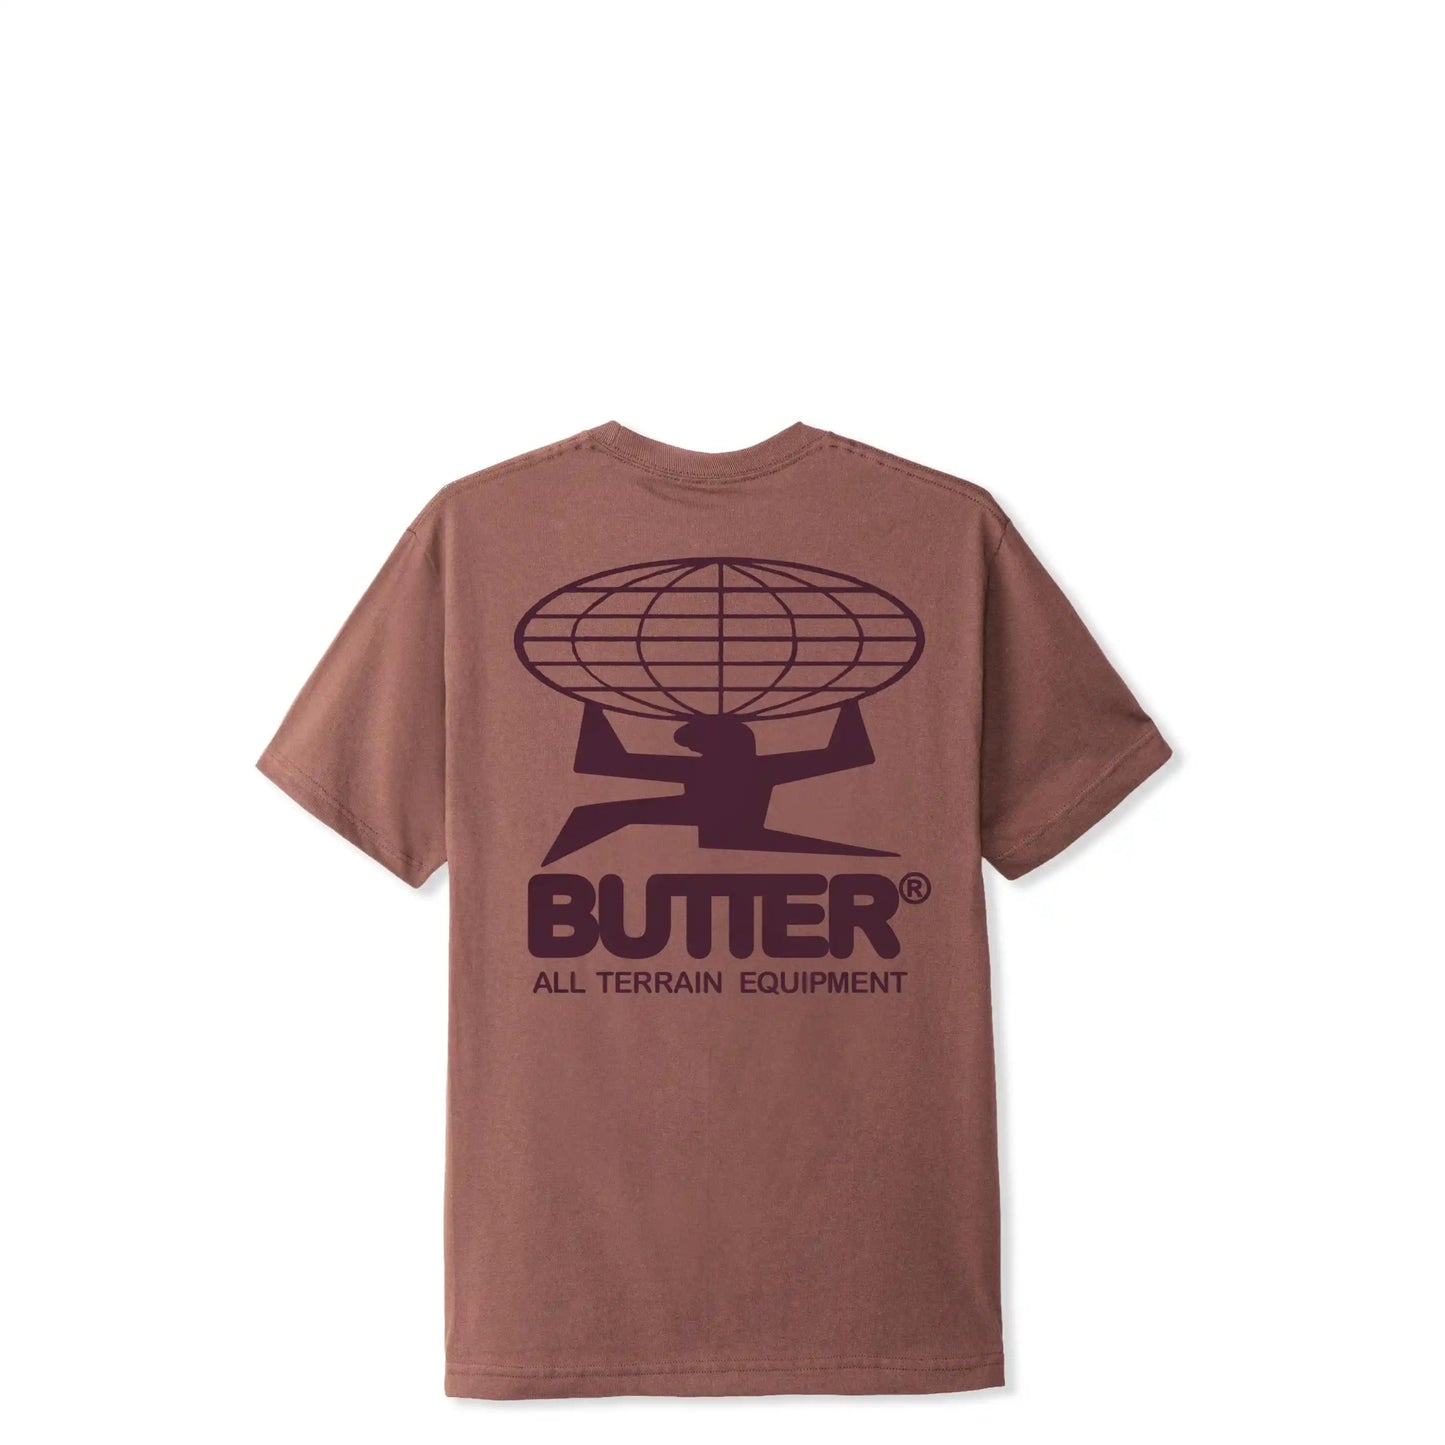 Butter Goods All Terrain Tee, washed wood - Tiki Room Skateboards - 2